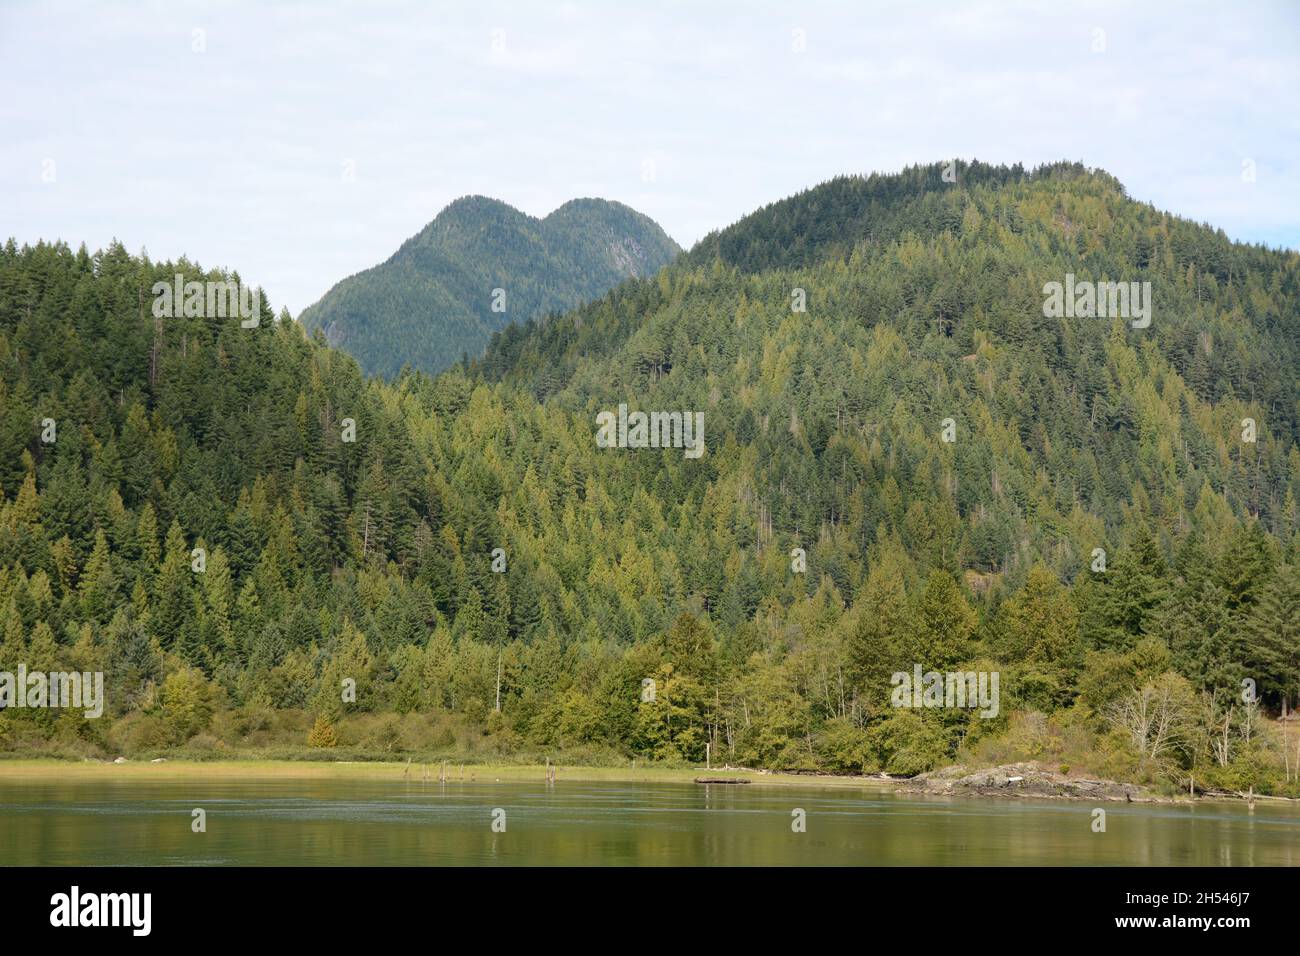 The Coast Mountains and forest along the Pitt River and Widgeon Marsh Regional Park, near Pitt Meadows, British Columbia, Canada. Stock Photo